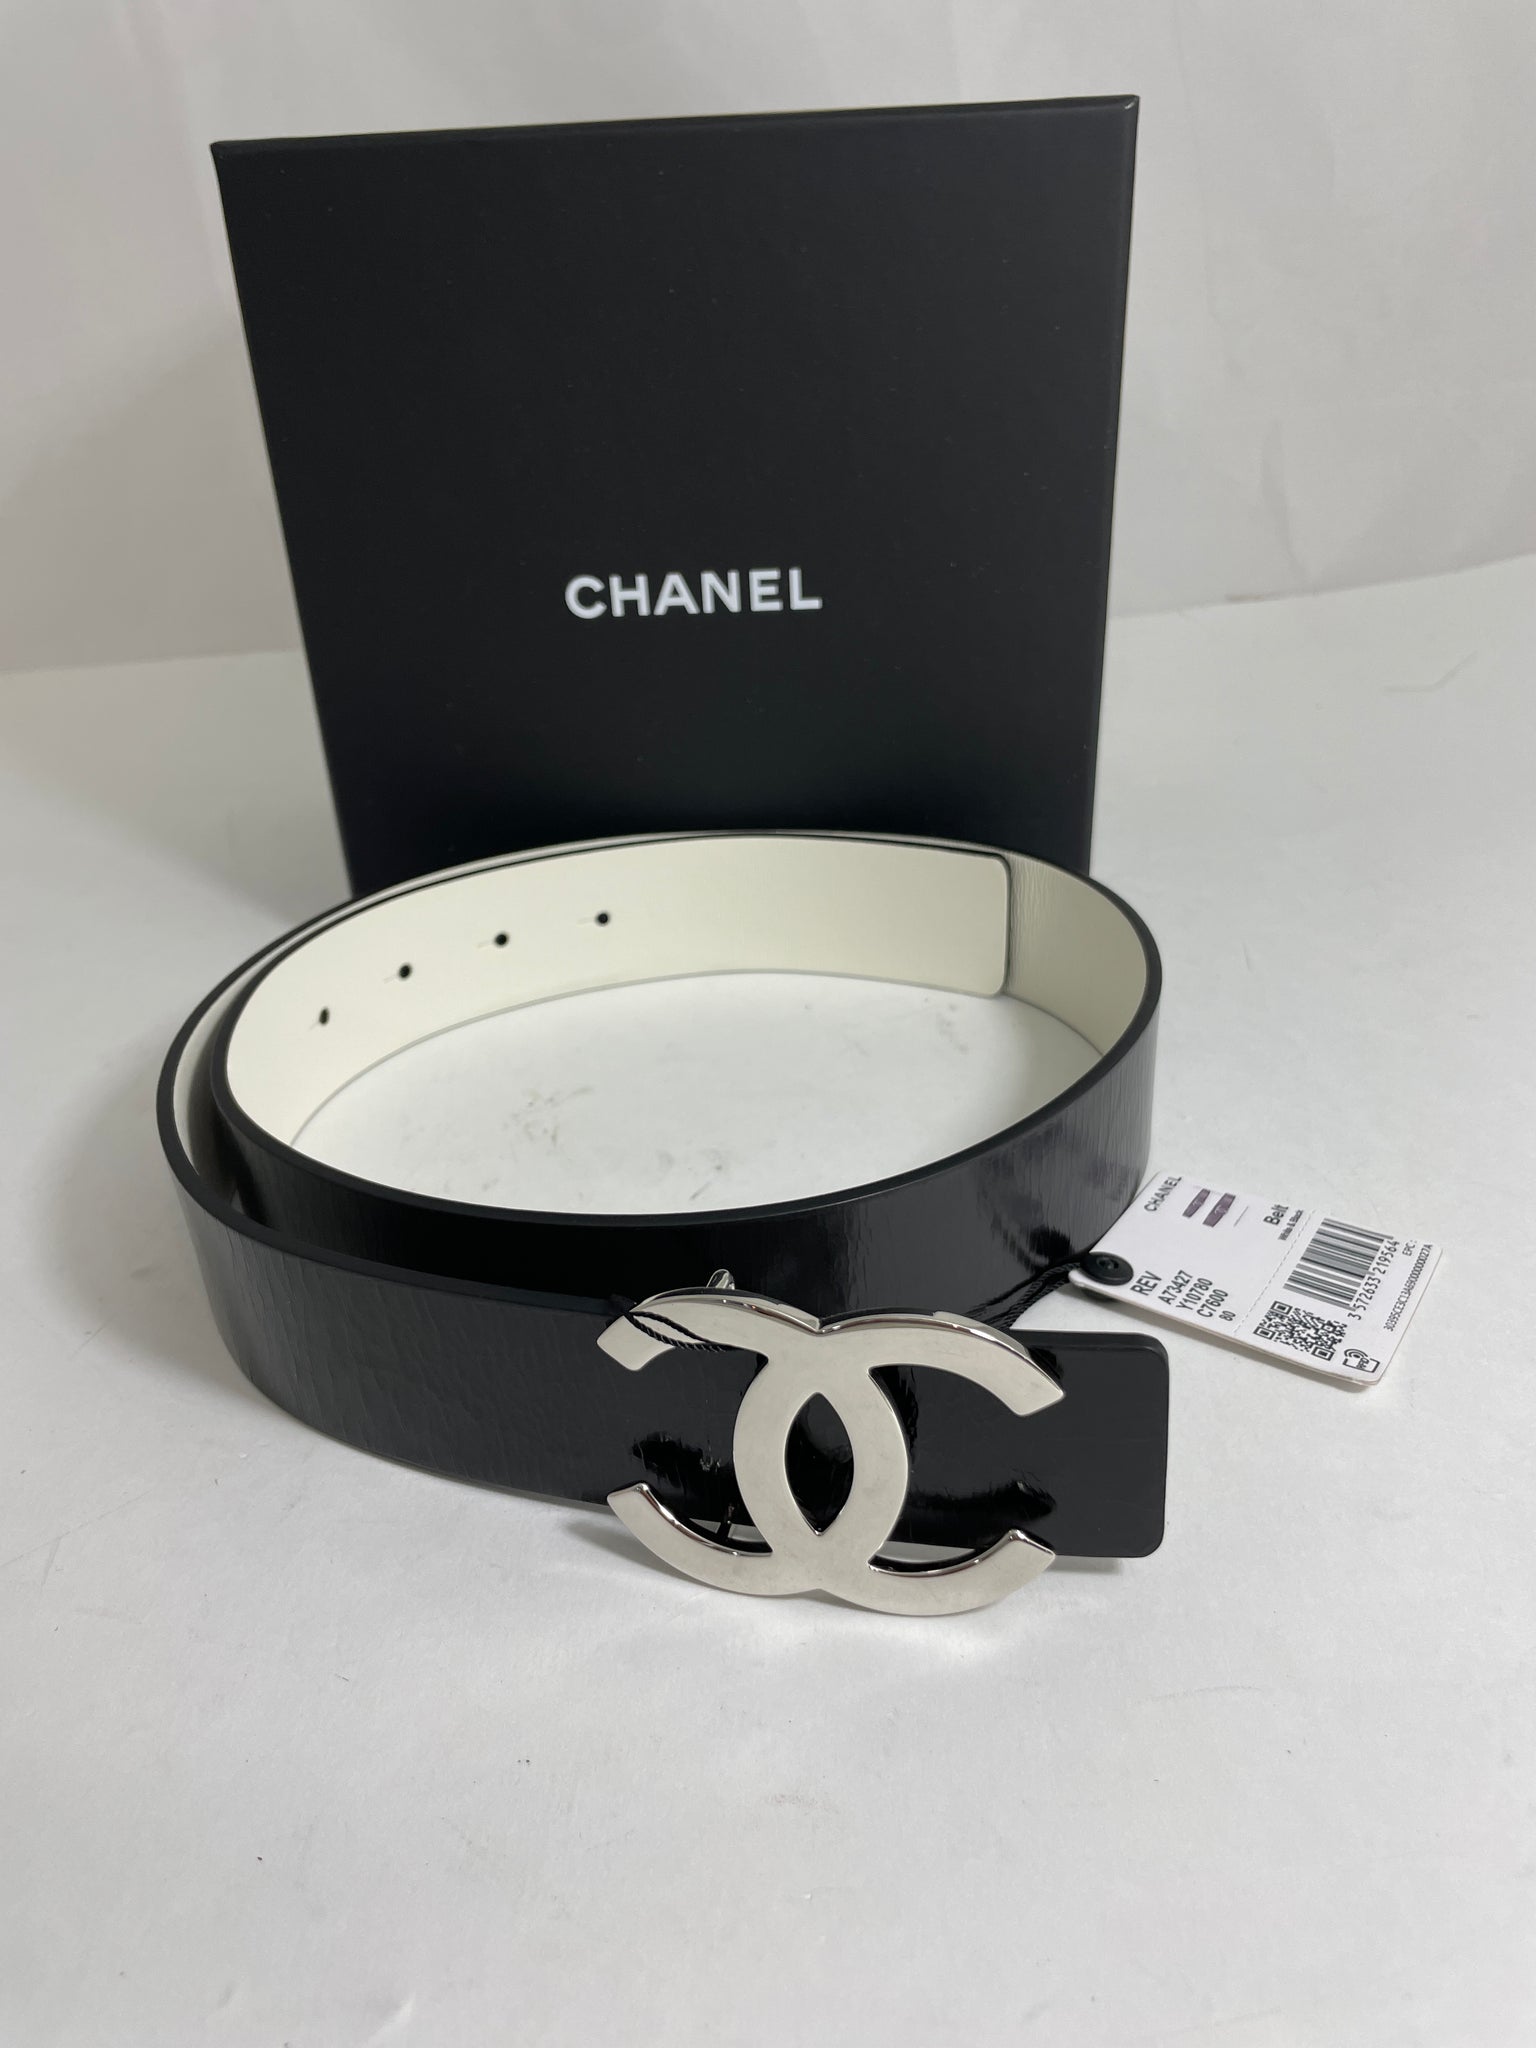 CHANEL, Accessories, Nwt Chanel Reversible Belt